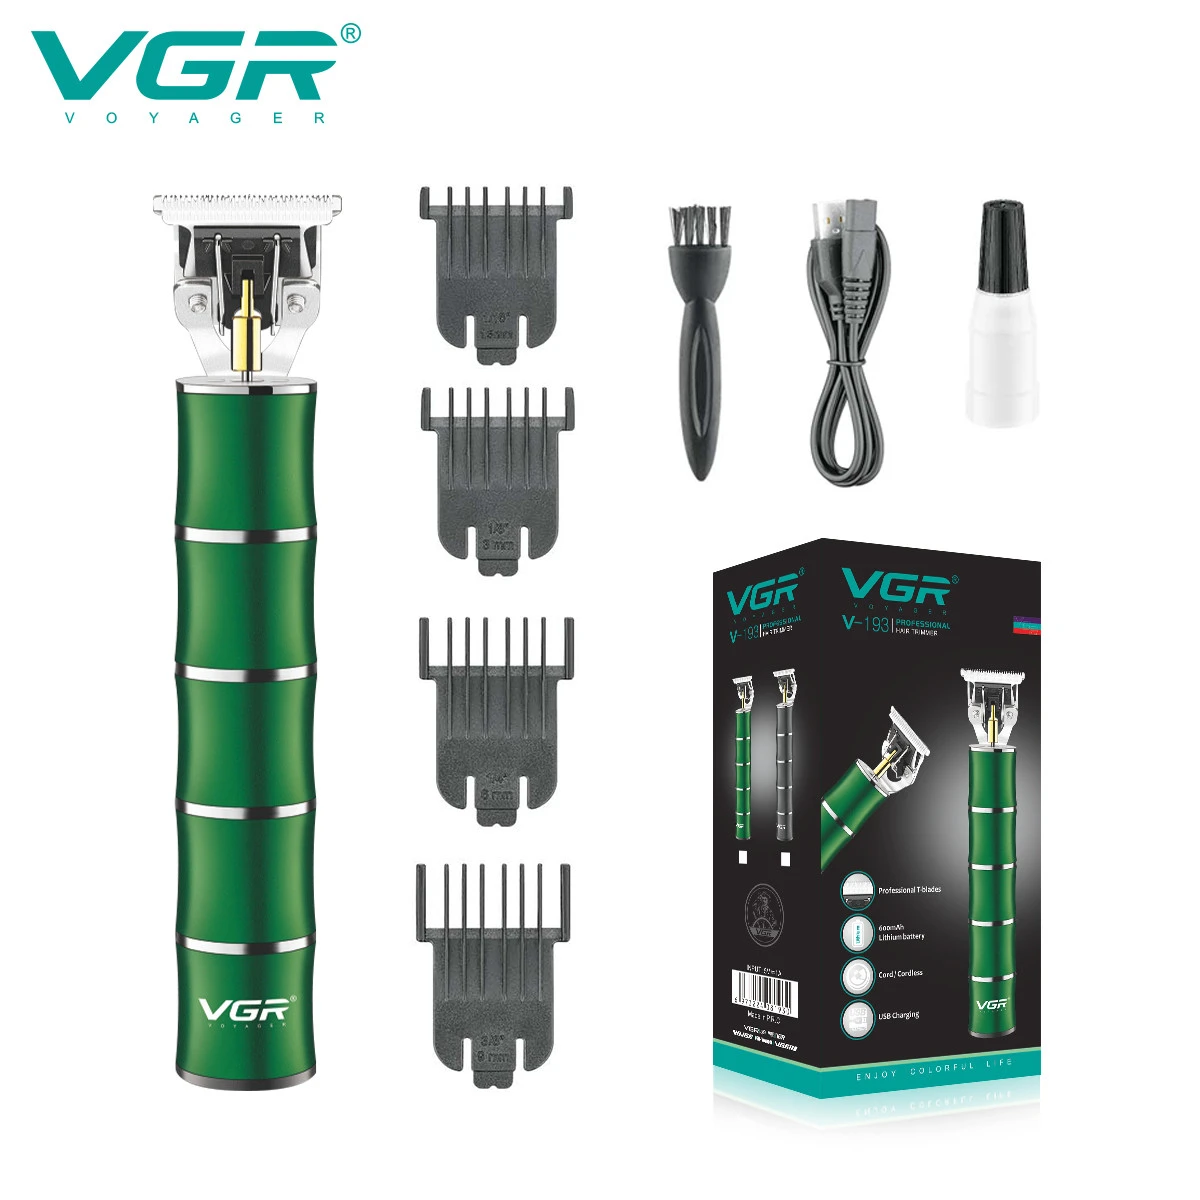 VGR electric hair trimmer V-193 trimmer for man rechargeable beard professional trimmer maquina de cortar cabelo